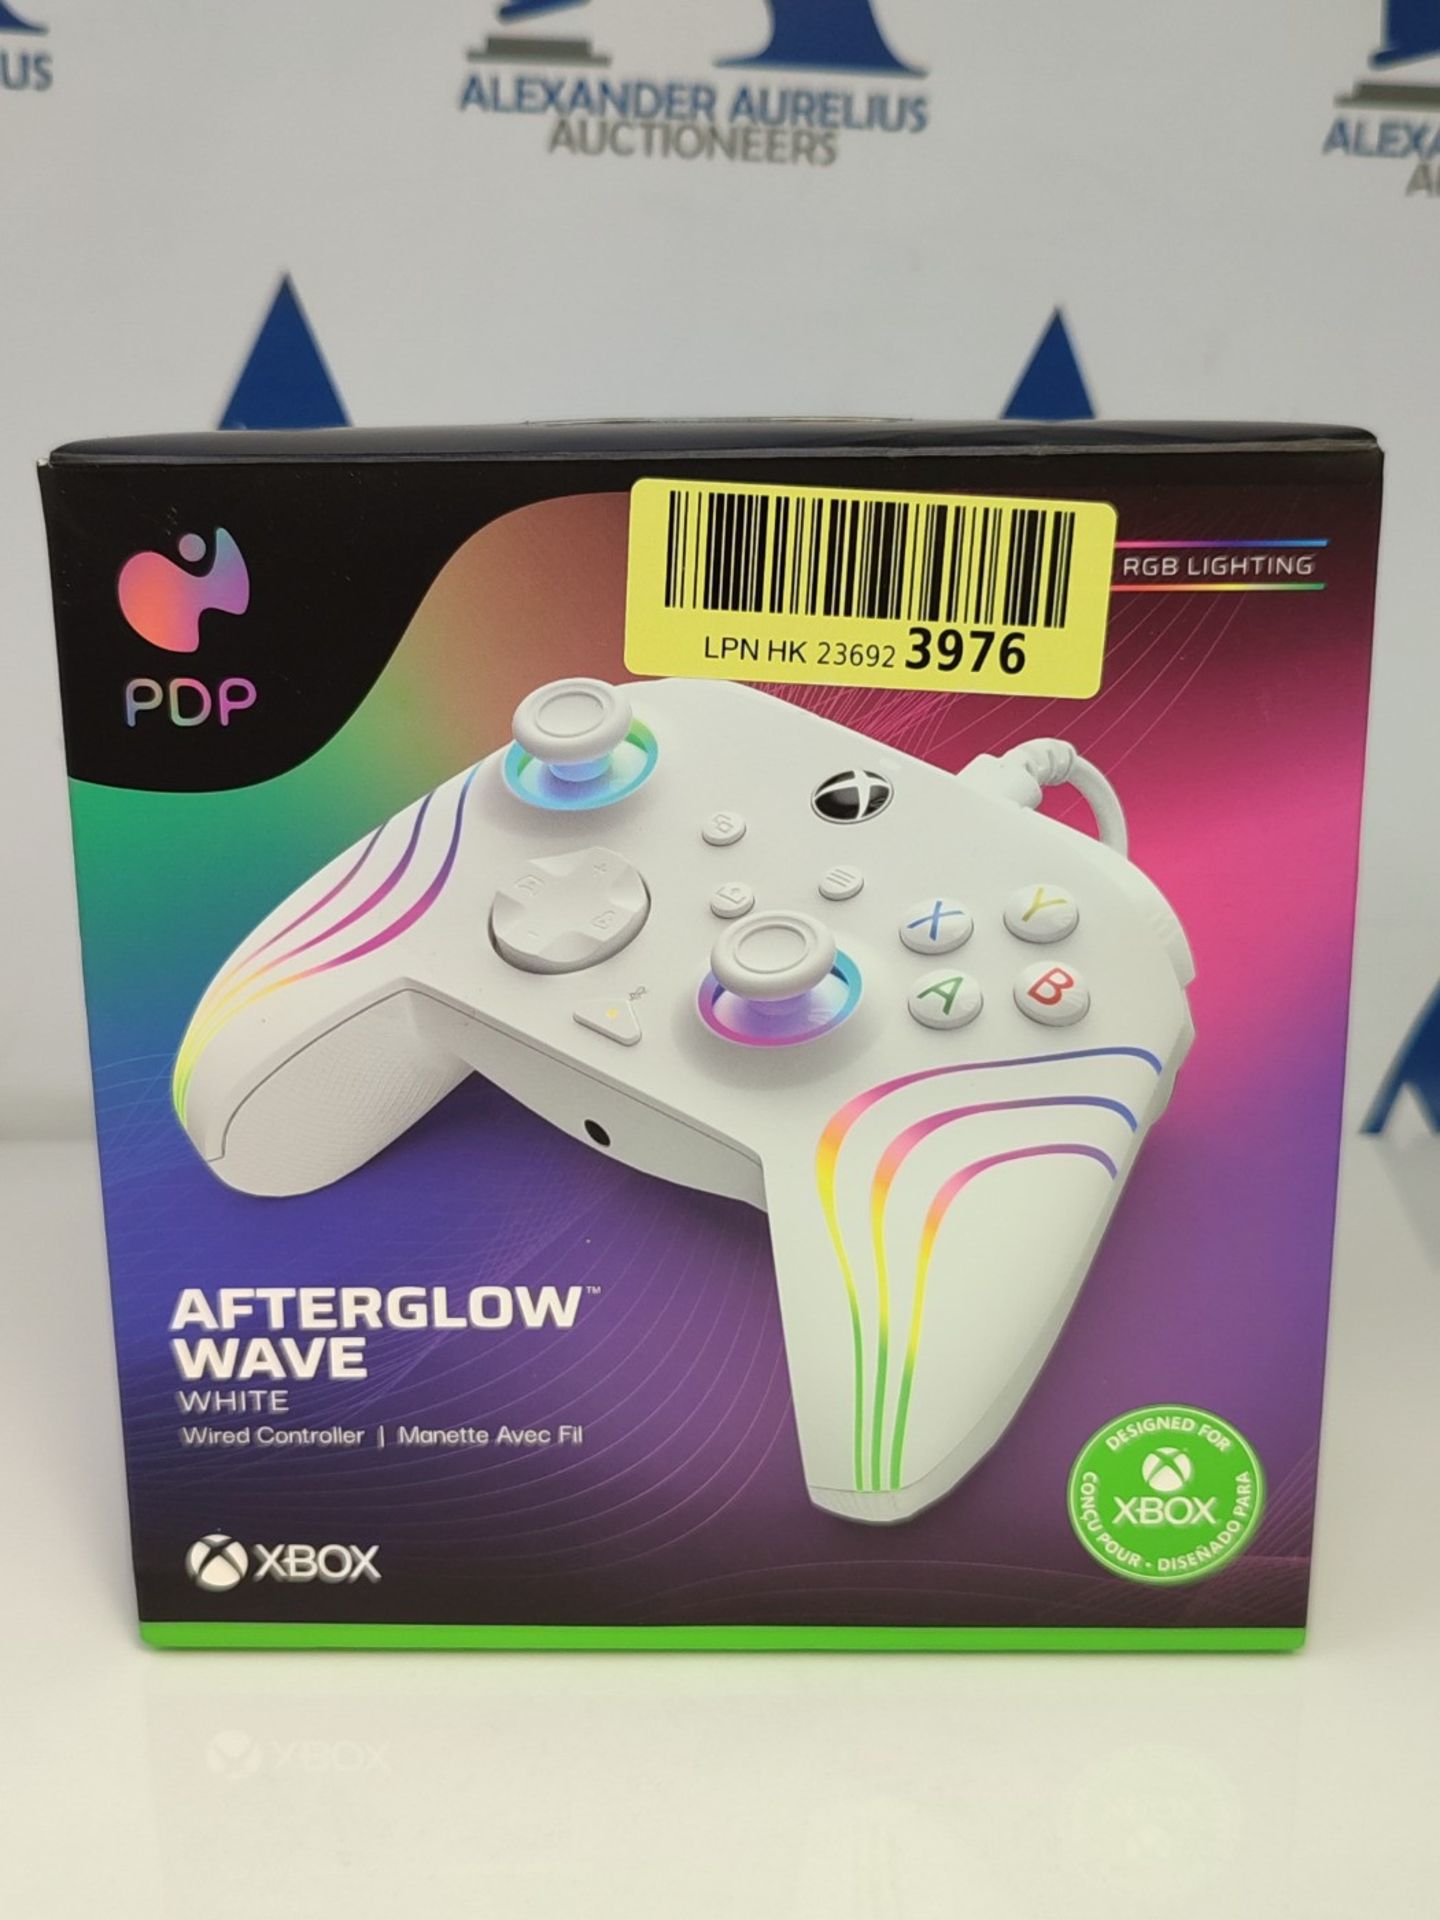 PDP AFTERGLOW XBX WAVE WIRED Controller in white for Xbox Series X|S, Xbox One, Offici - Image 2 of 3